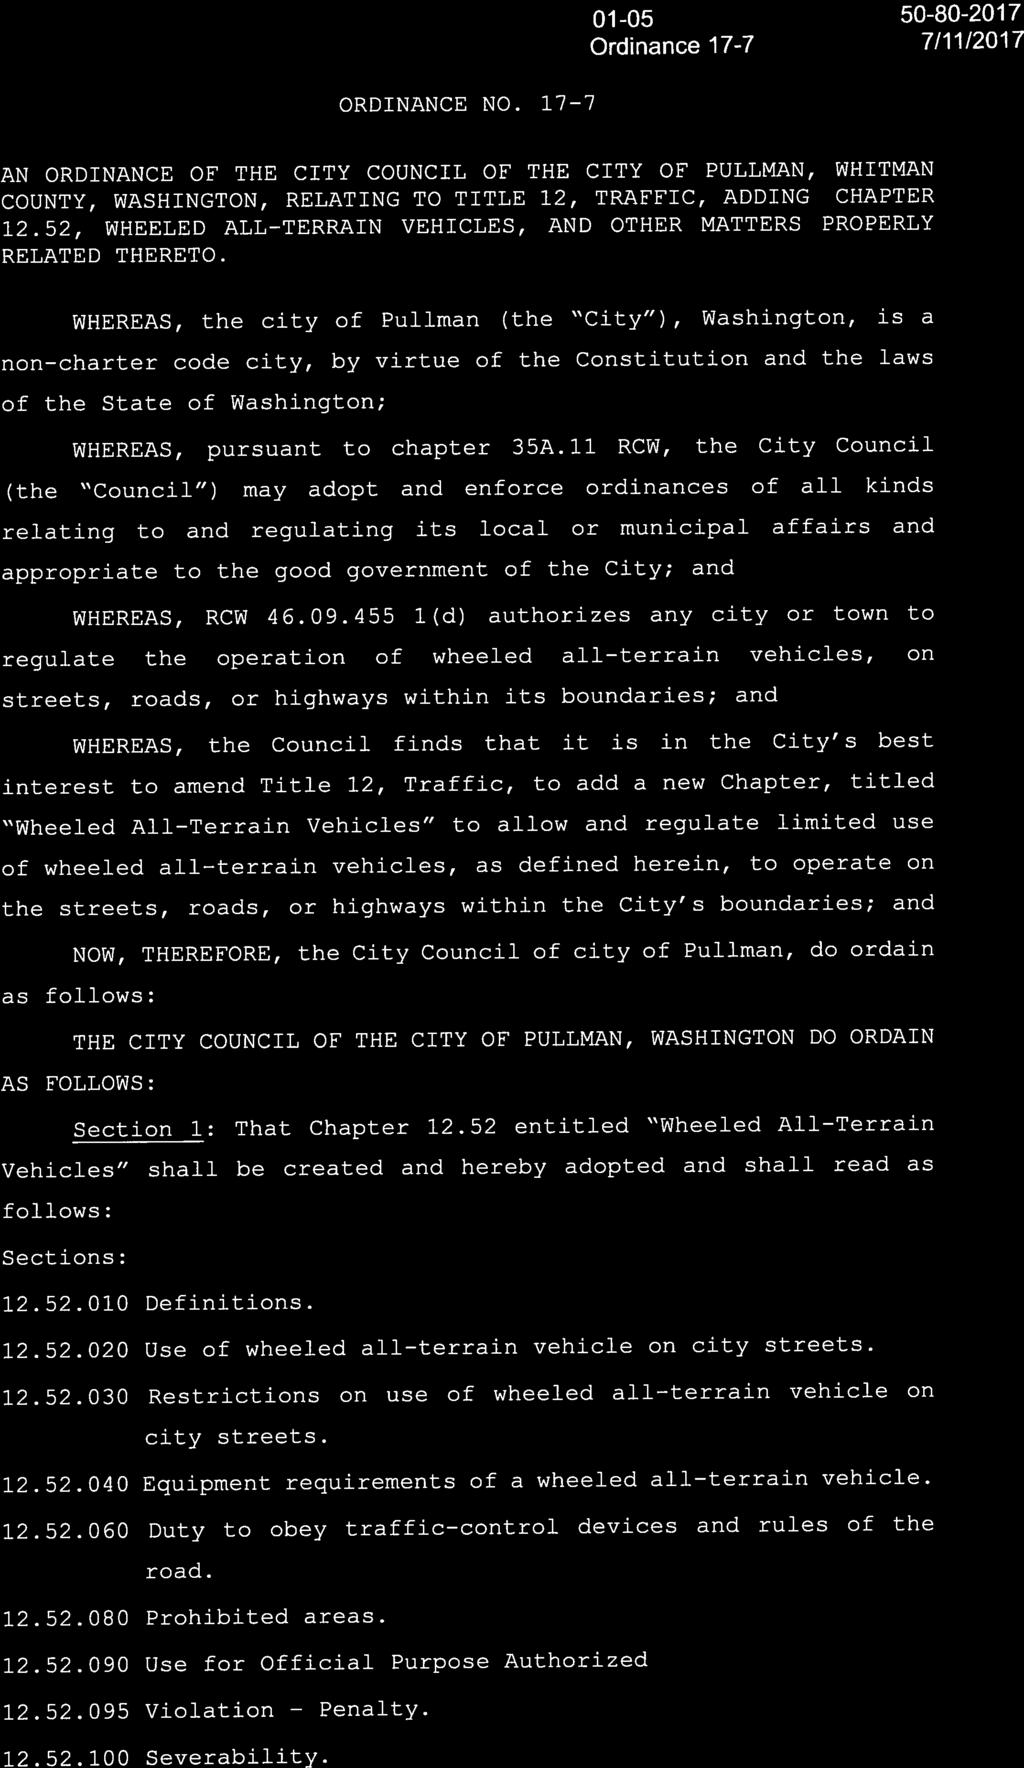 01-05 50-80-2017 Ordinance 17-7 7/11/2017 ORDINANCE NO. 17-7 AN ORDINANCE OF THE CITY COUNCIL OF THE CITY OF PULLMAN, WHITMAN COUNTY, WASHINGTON, RELATING TO TITLE 12, TRAFFIC, ADDING CHAPTER 12.